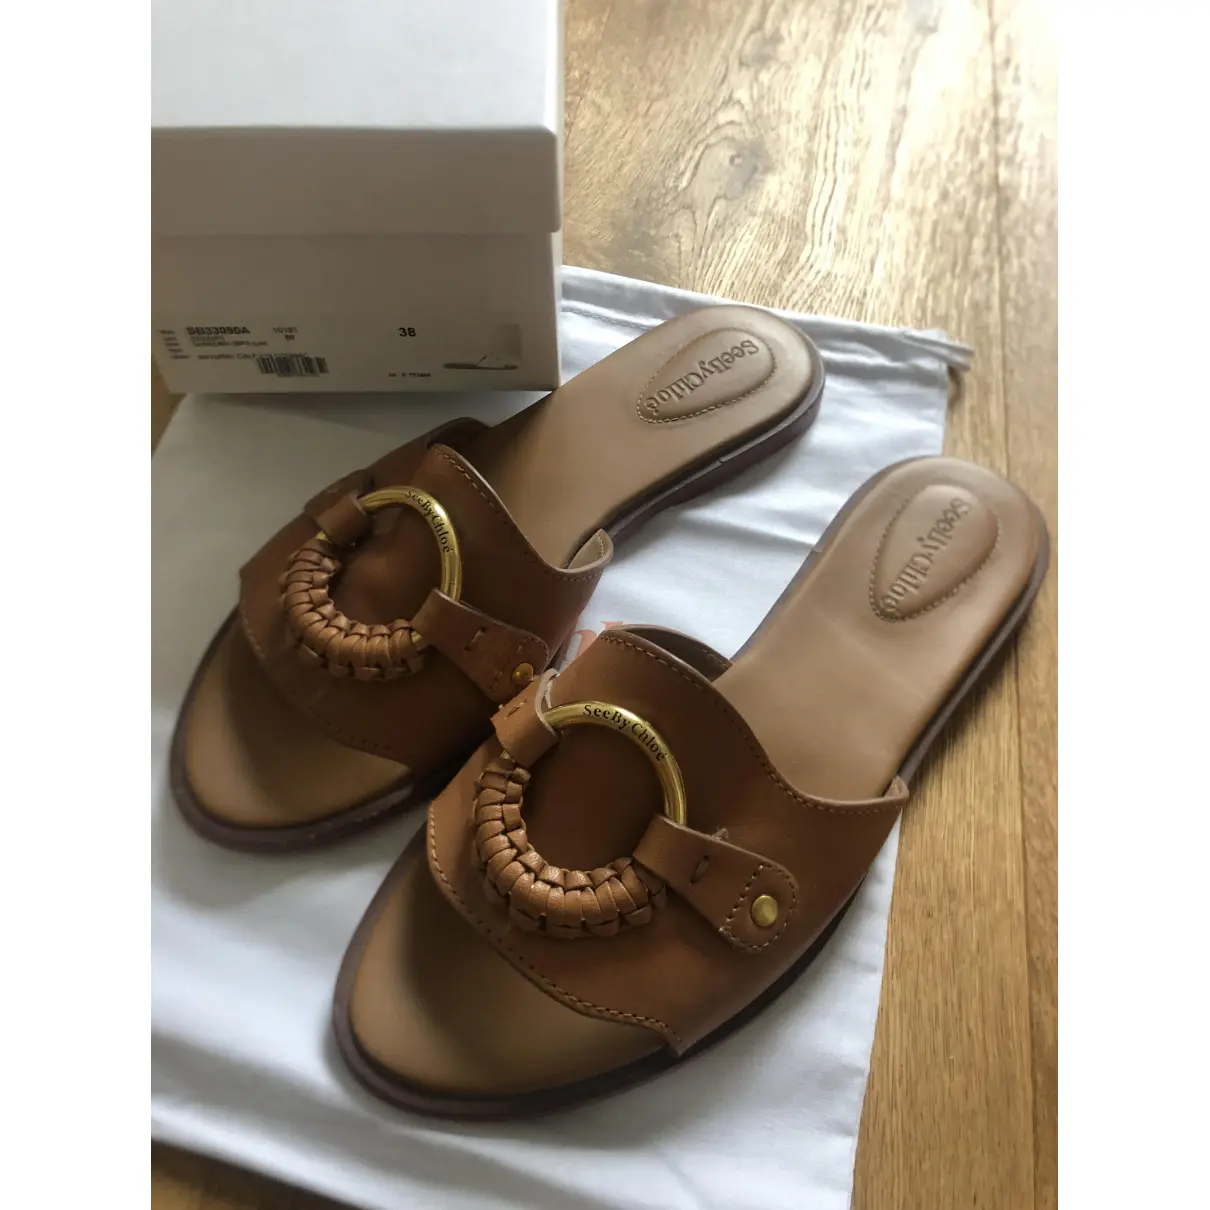 Buy See by Chloé Leather mules online